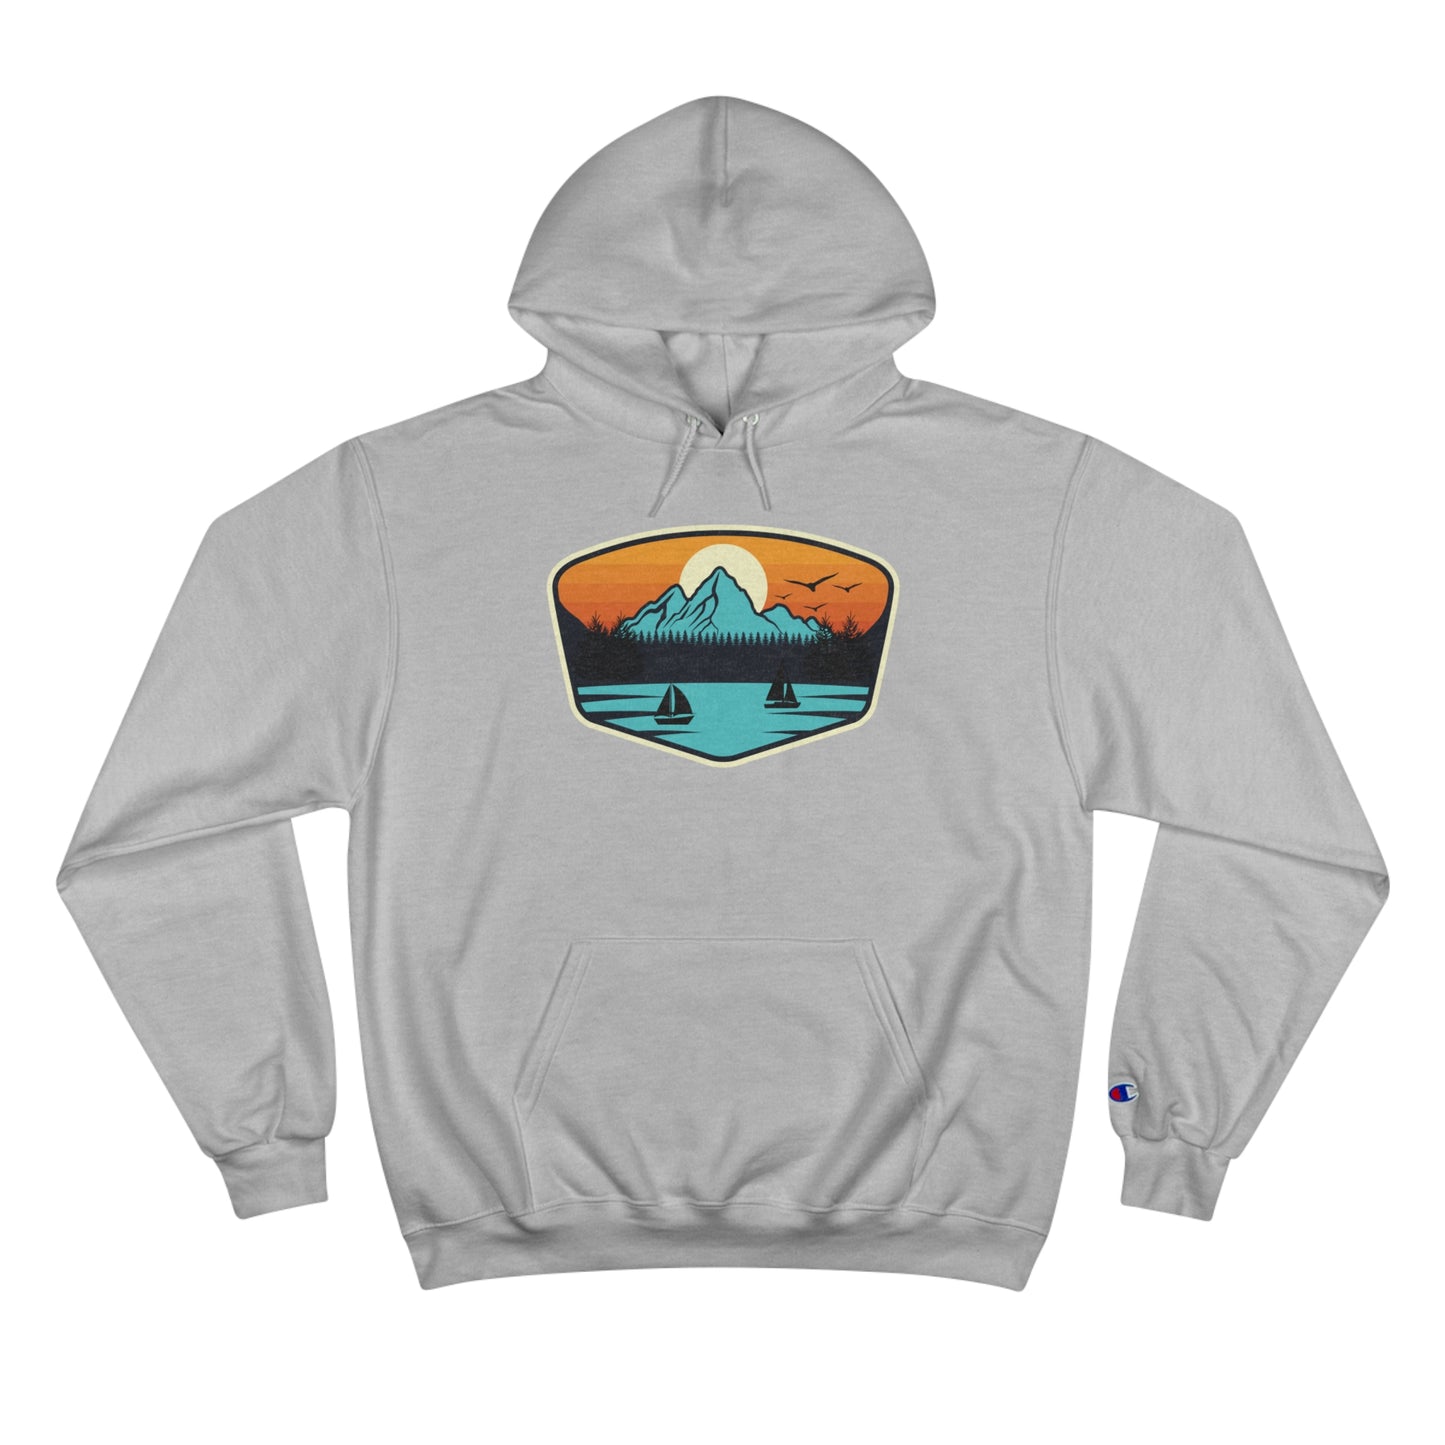 A great design that celebrates the wonderful outdoors on this very comfortable Champion Hoodie.